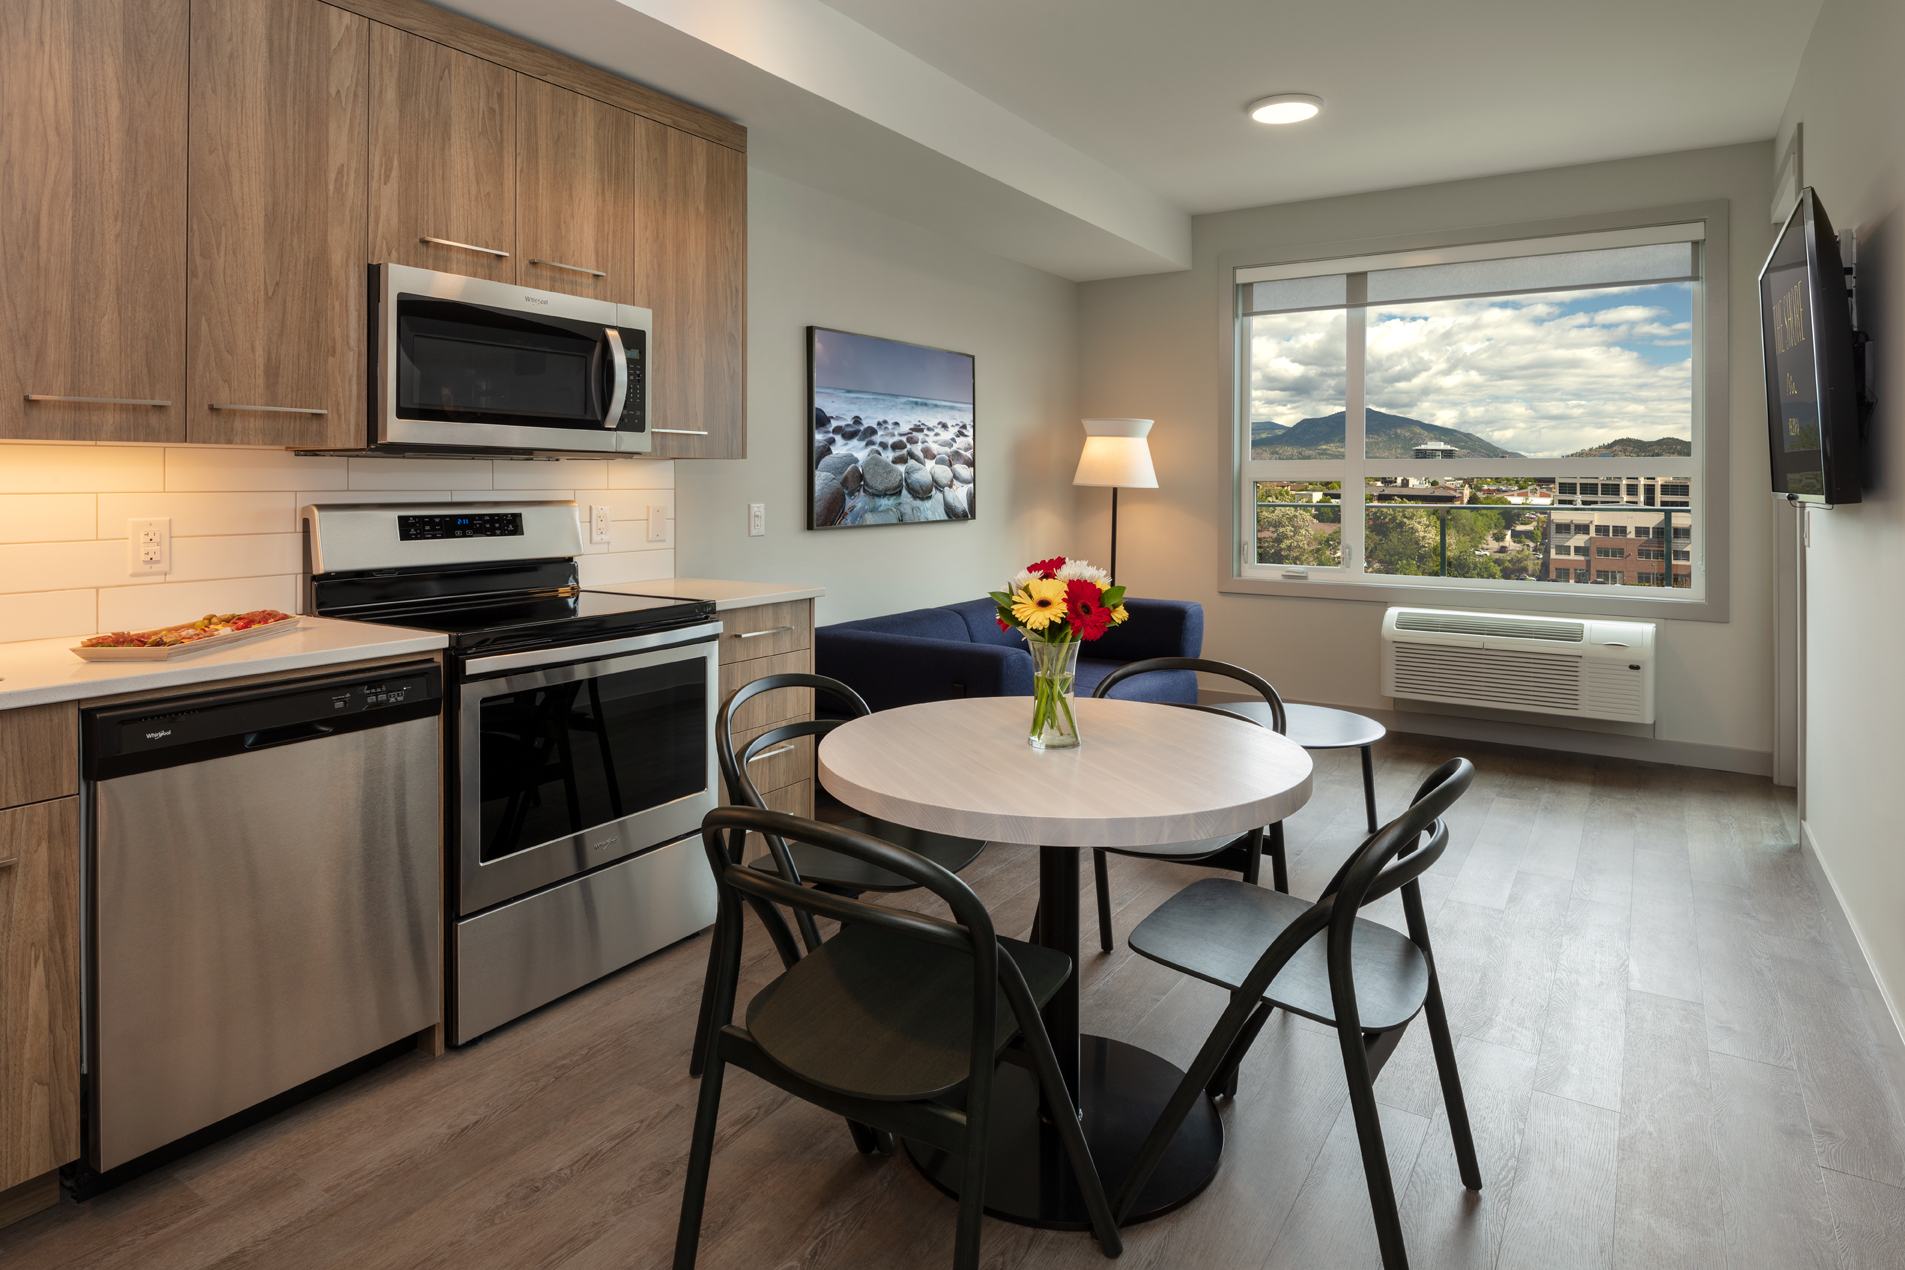 the kitchen of the 1 bedroom plus den suite at The Shore Kelowna, with a view of mountains out the window and stainless steel appliances